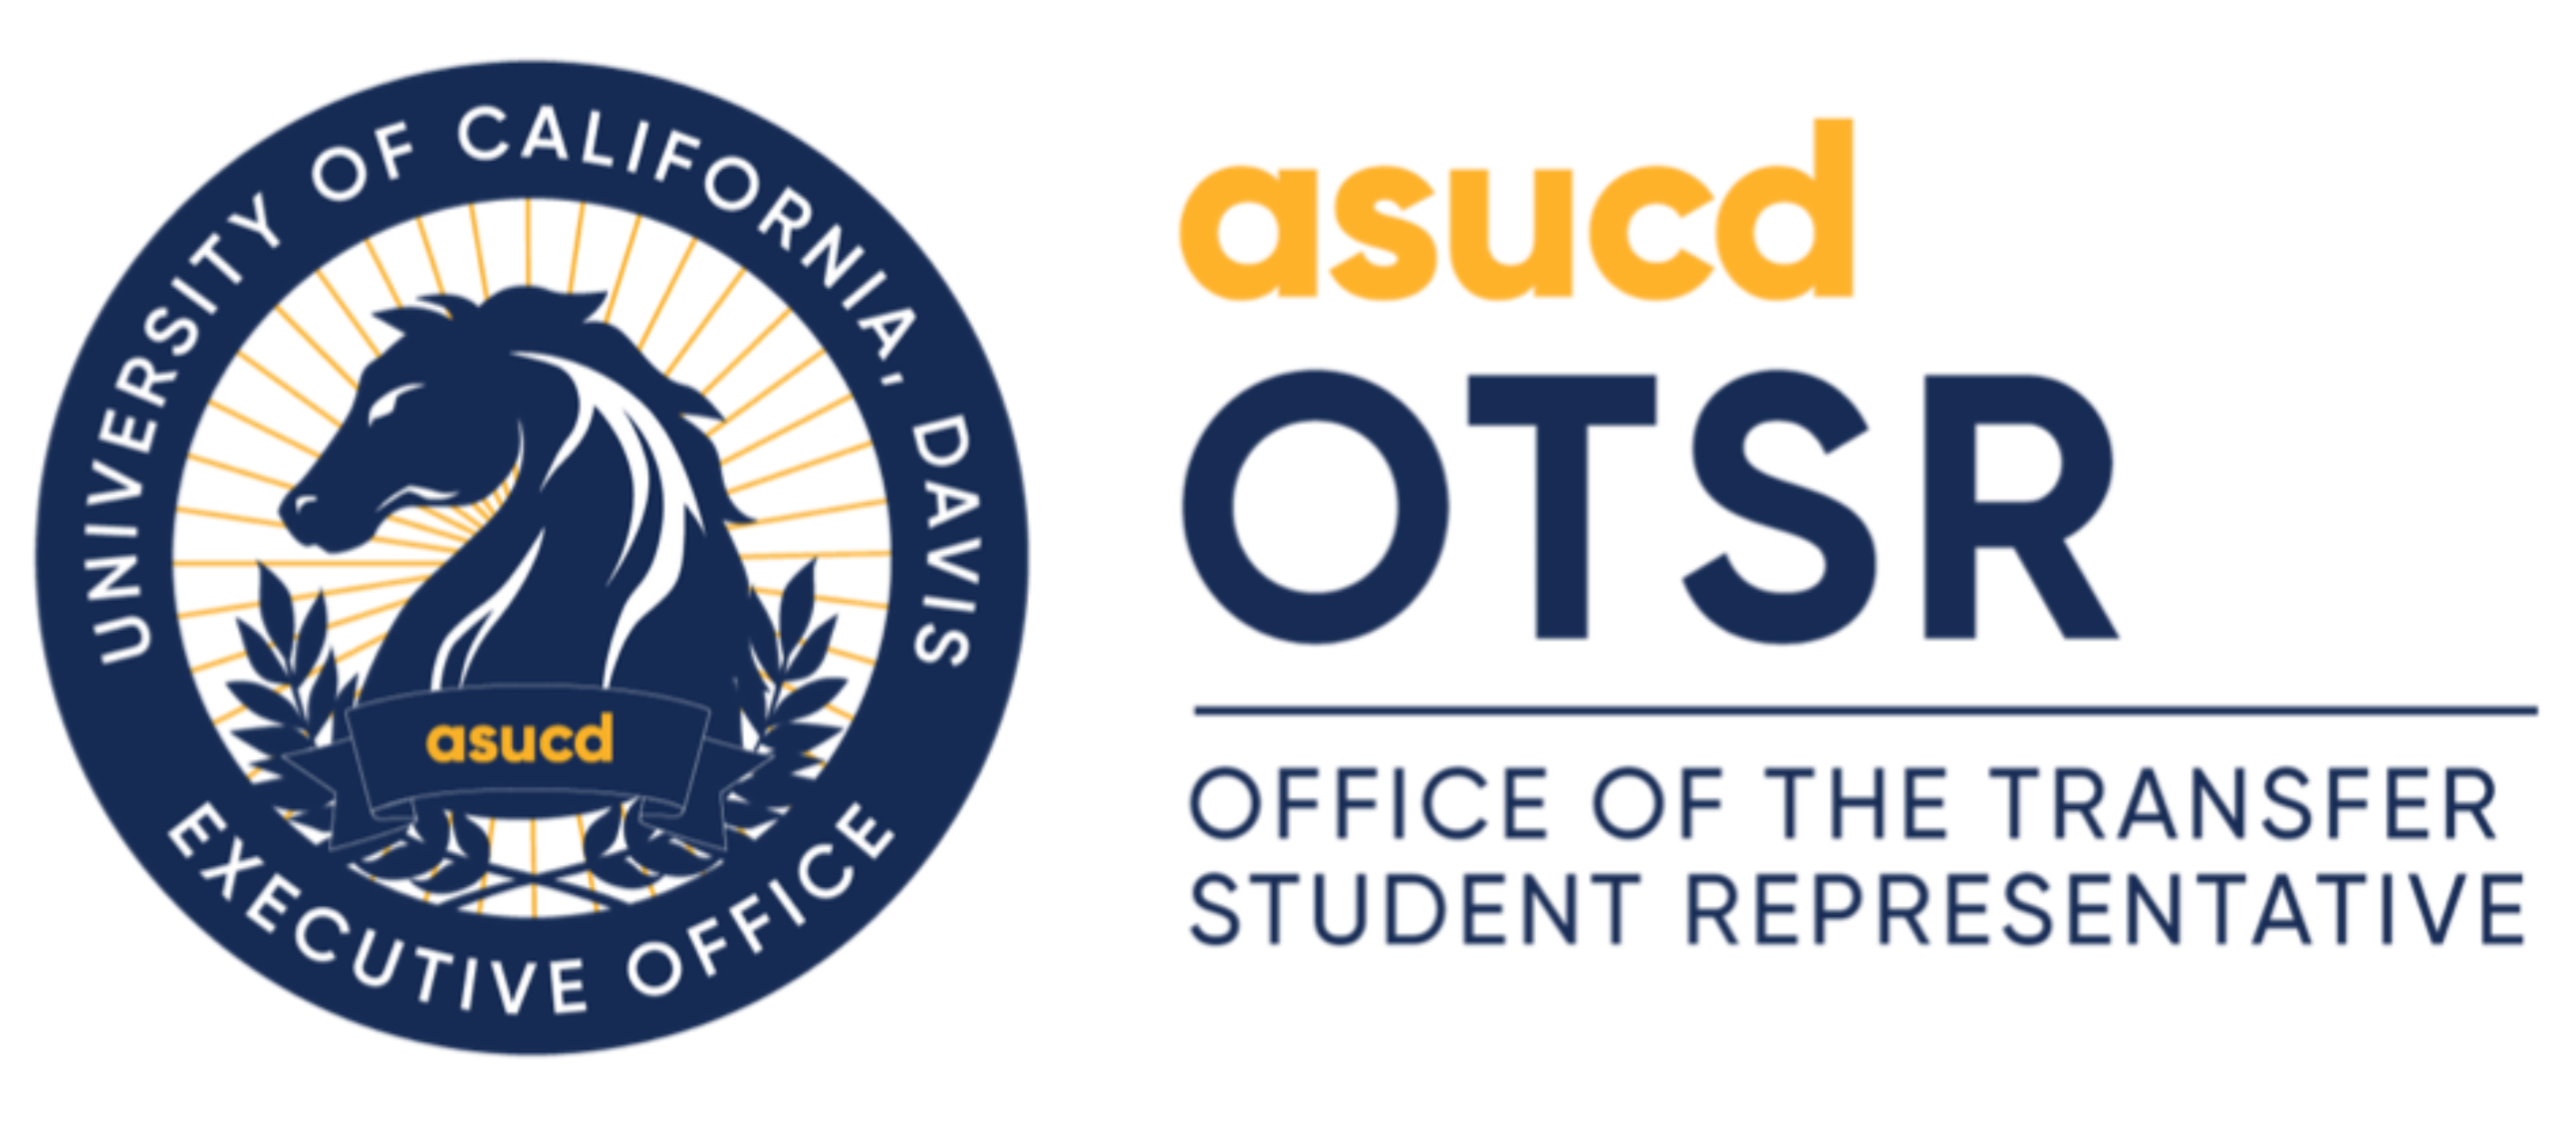 Office of the Transfer Student Representative | ASUCD